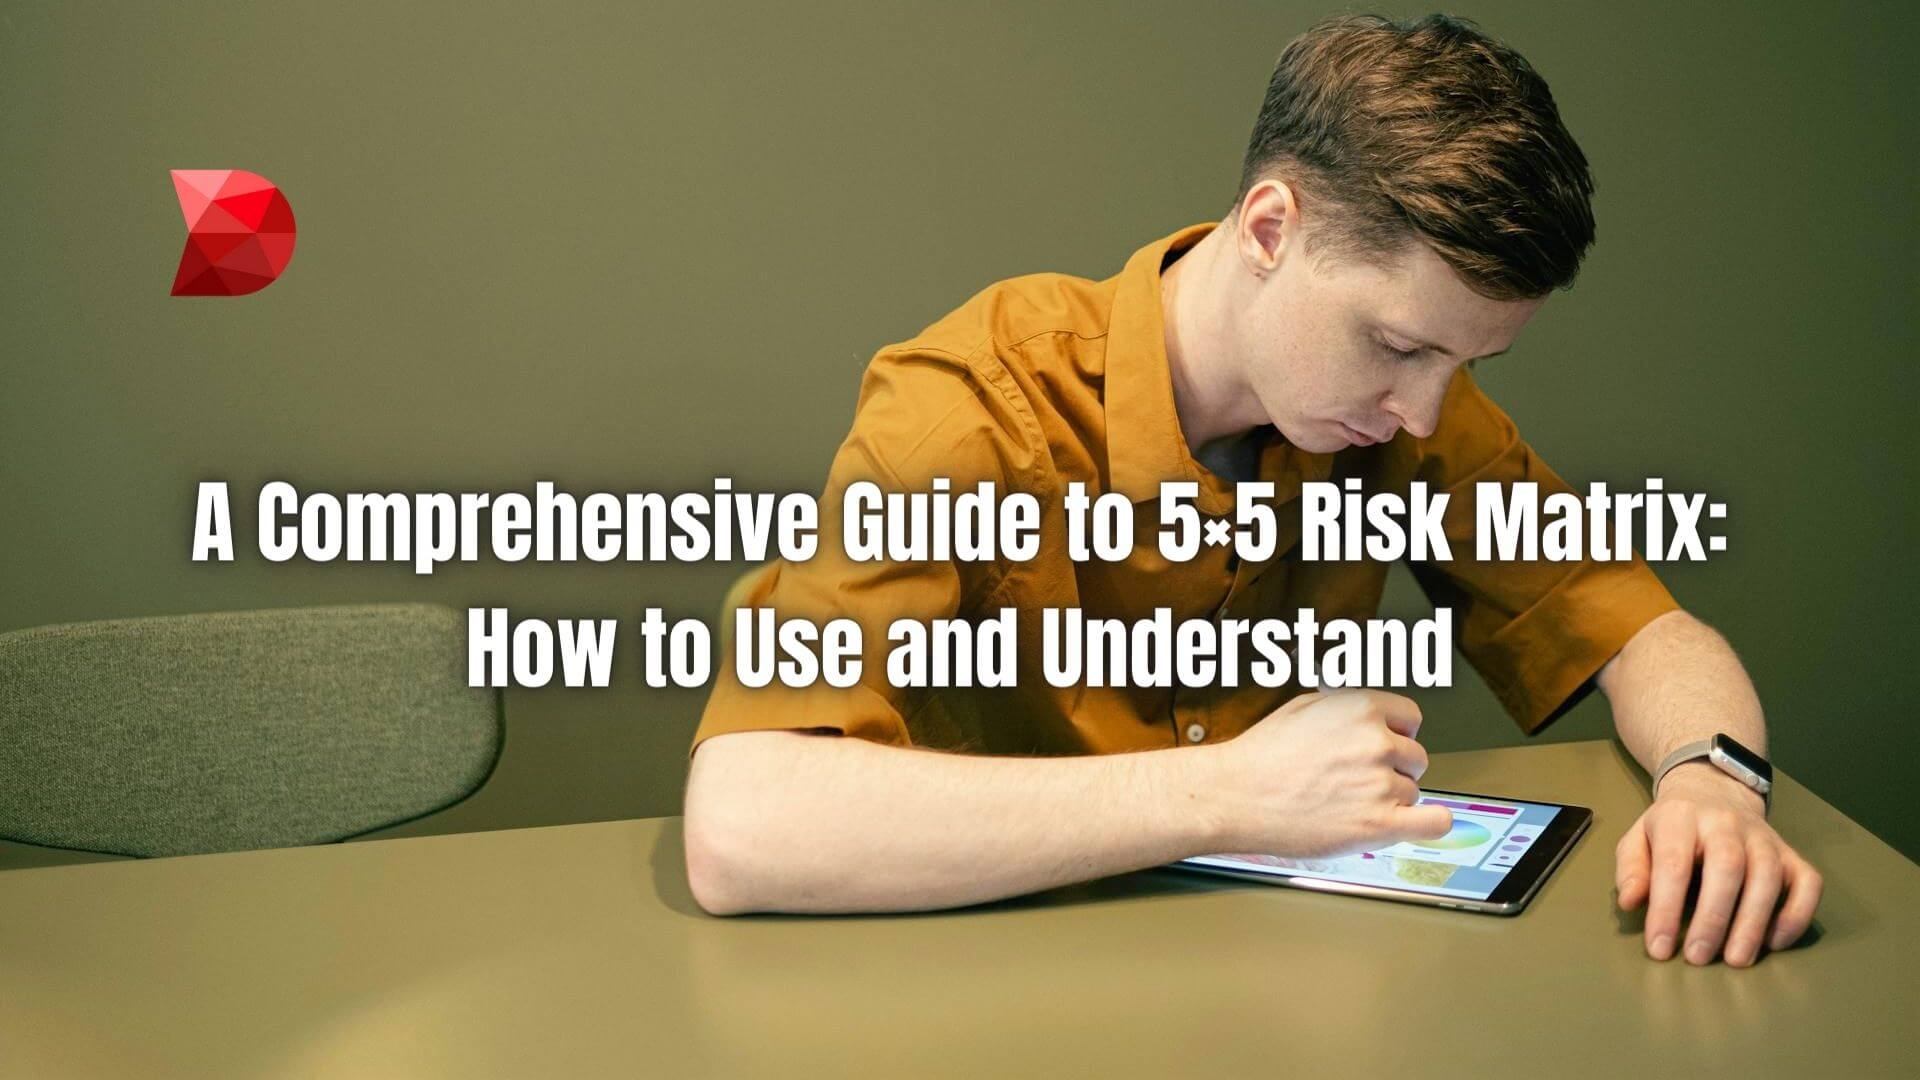 Master the intricacies of the 5x5 Risk Matrix with our guide. Learn how to utilize and interpret it effectively for informed decision-making.